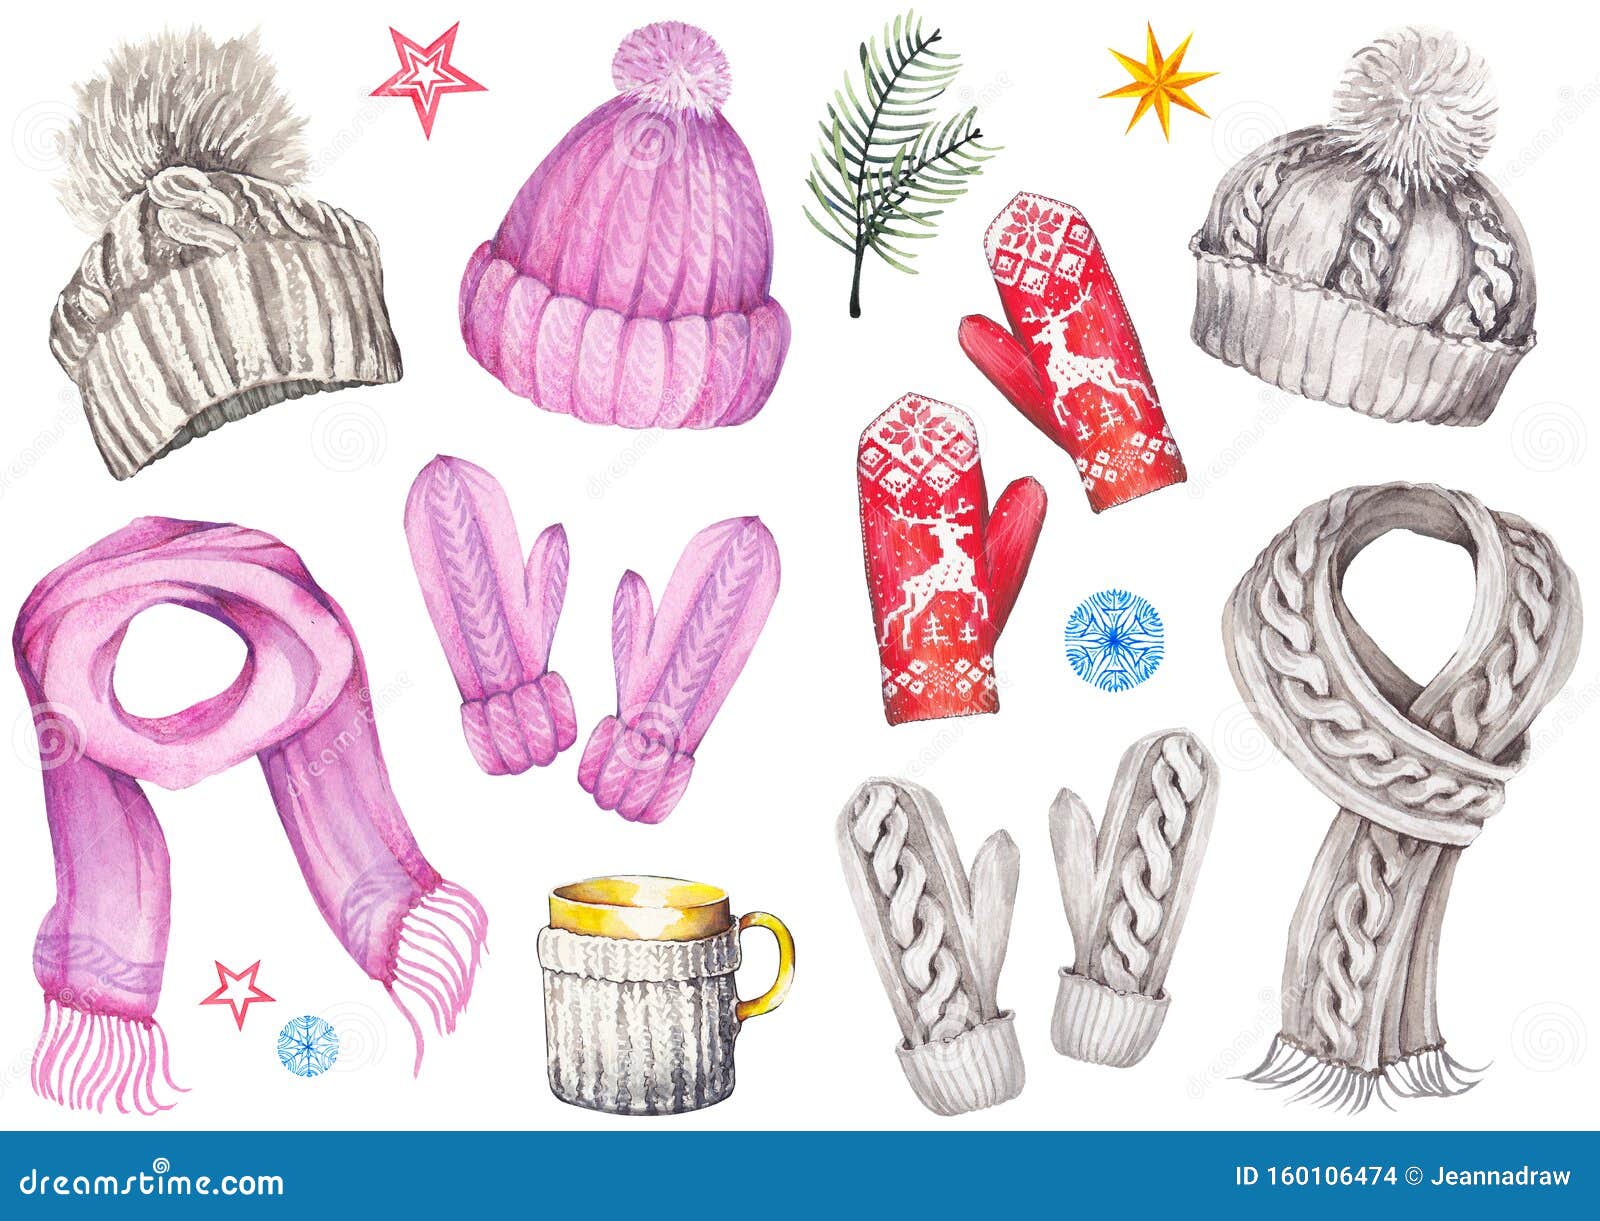 winter set of knitted hats, scarfs, mittens, coffee mug, fir branch, stars and snowflakes.